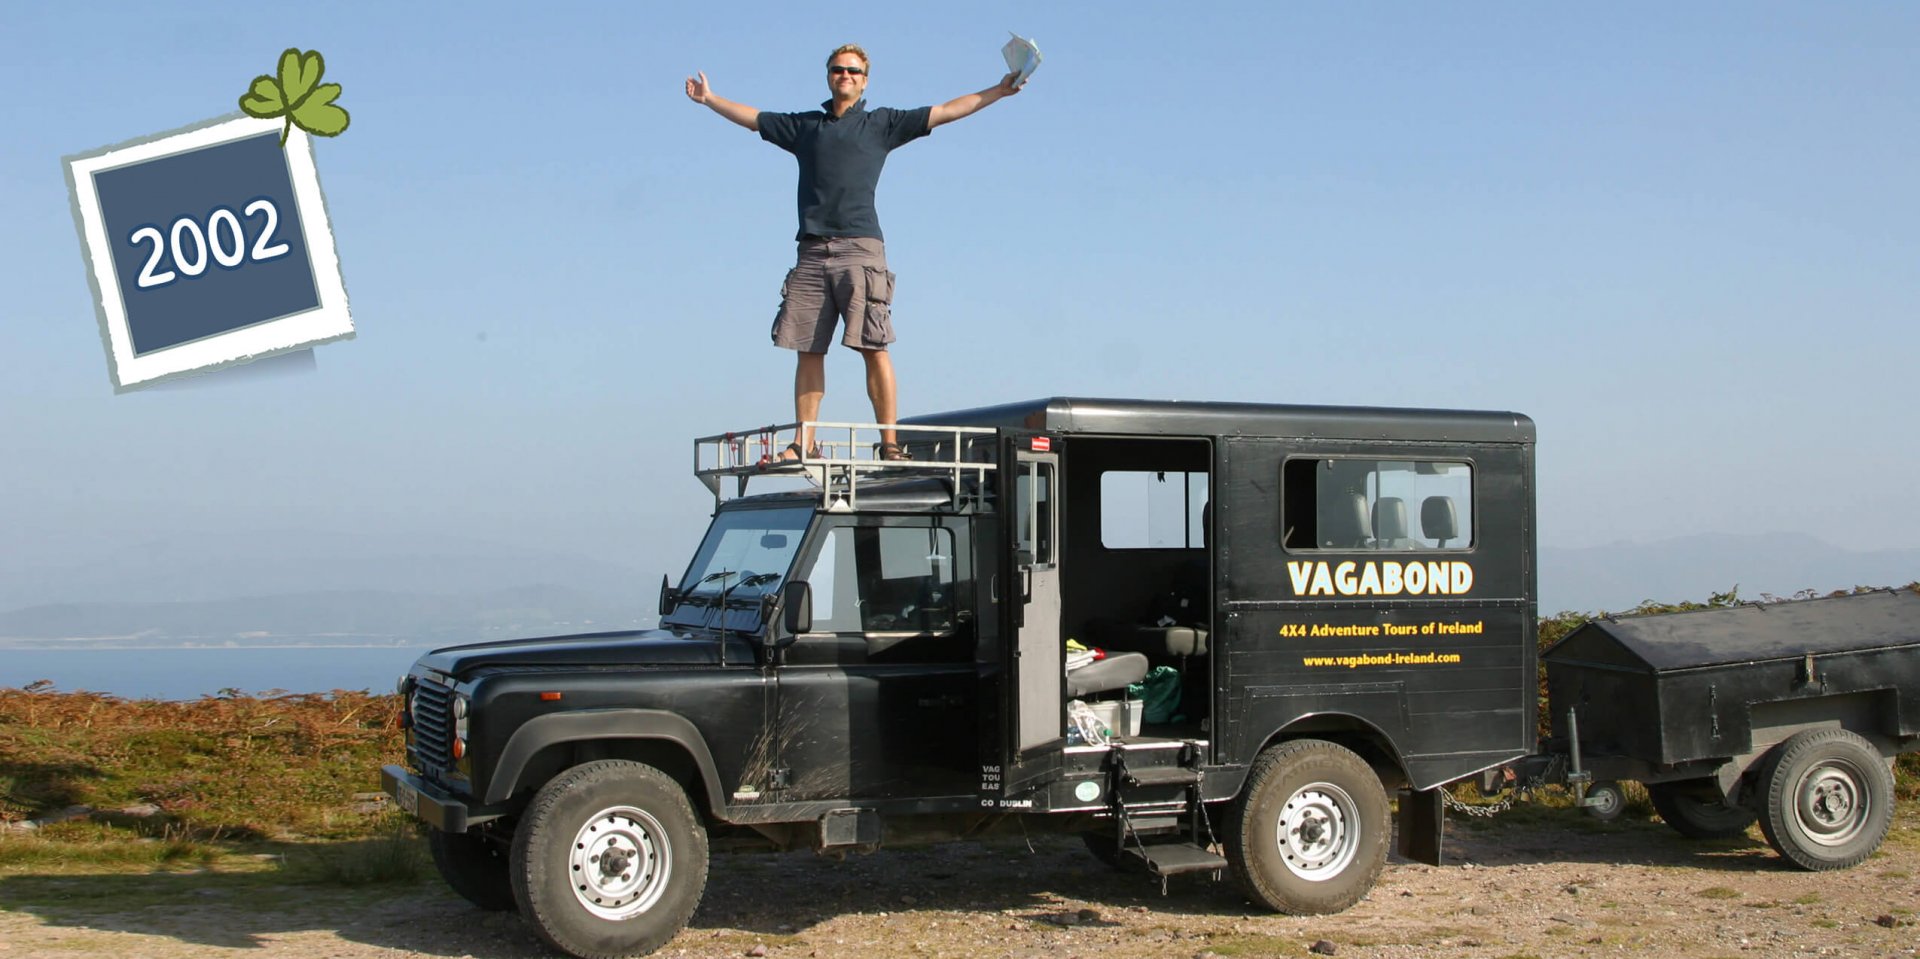 Rob Rankin standing on a tour vehicle in Ireland